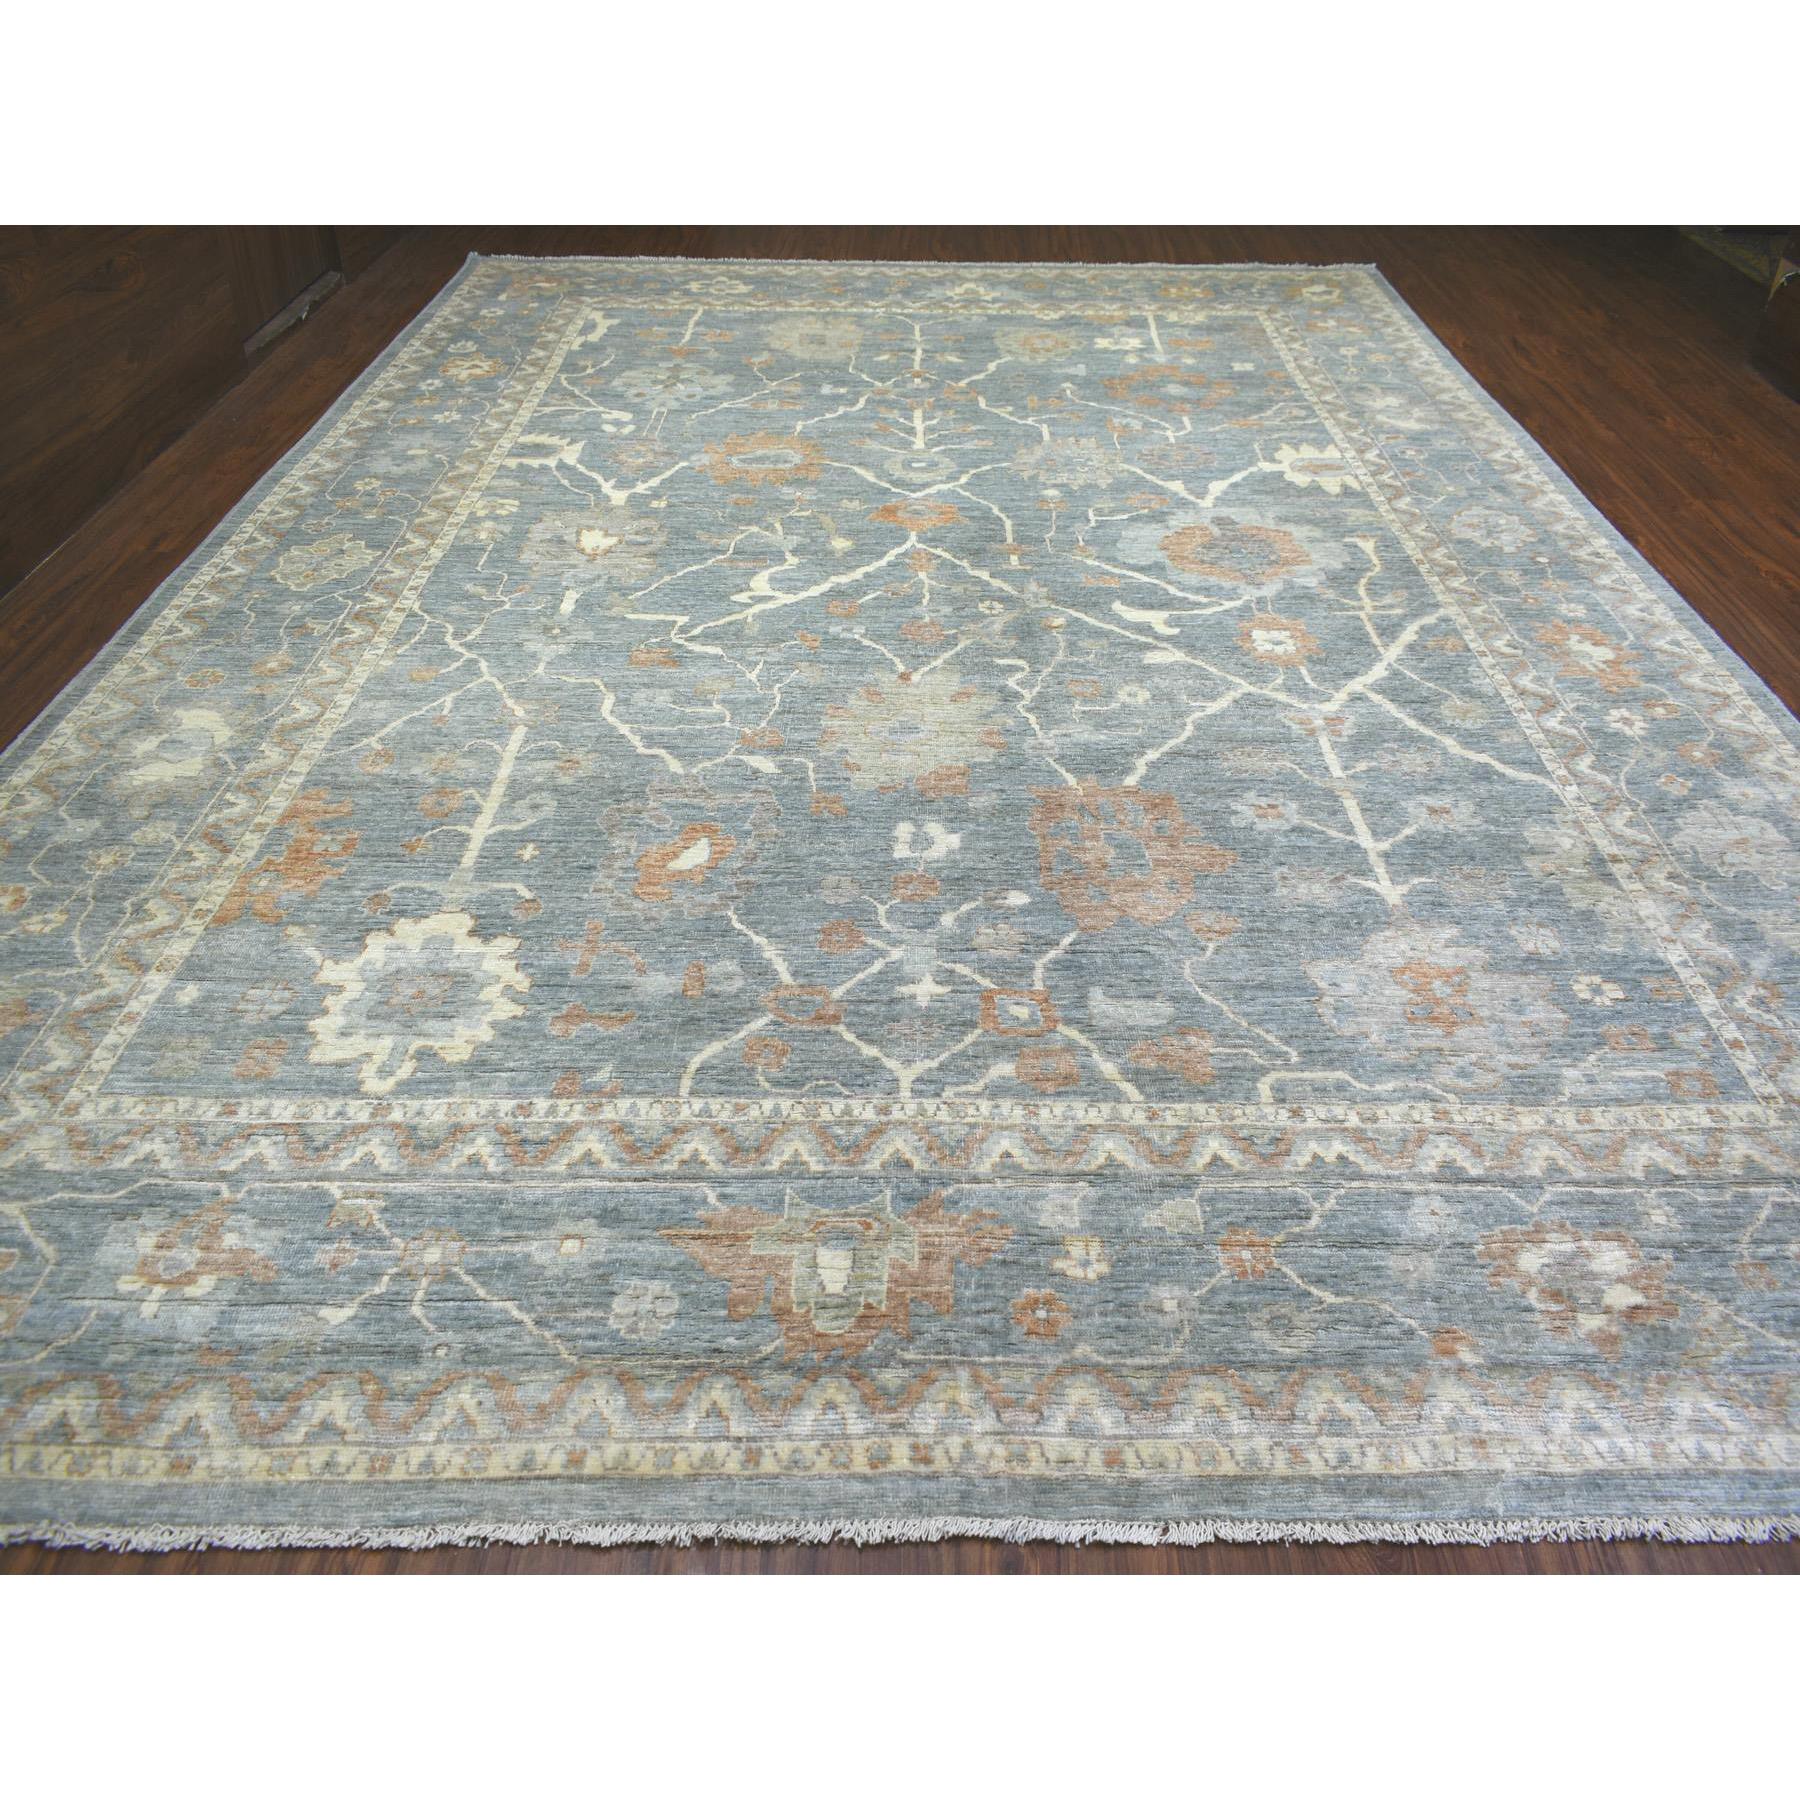 12'x16' Light Blue Angora Oushak With Colorful Leaf Design Natural Dyes, Afghan Wool Hand Woven Oversize Oriental Rug 